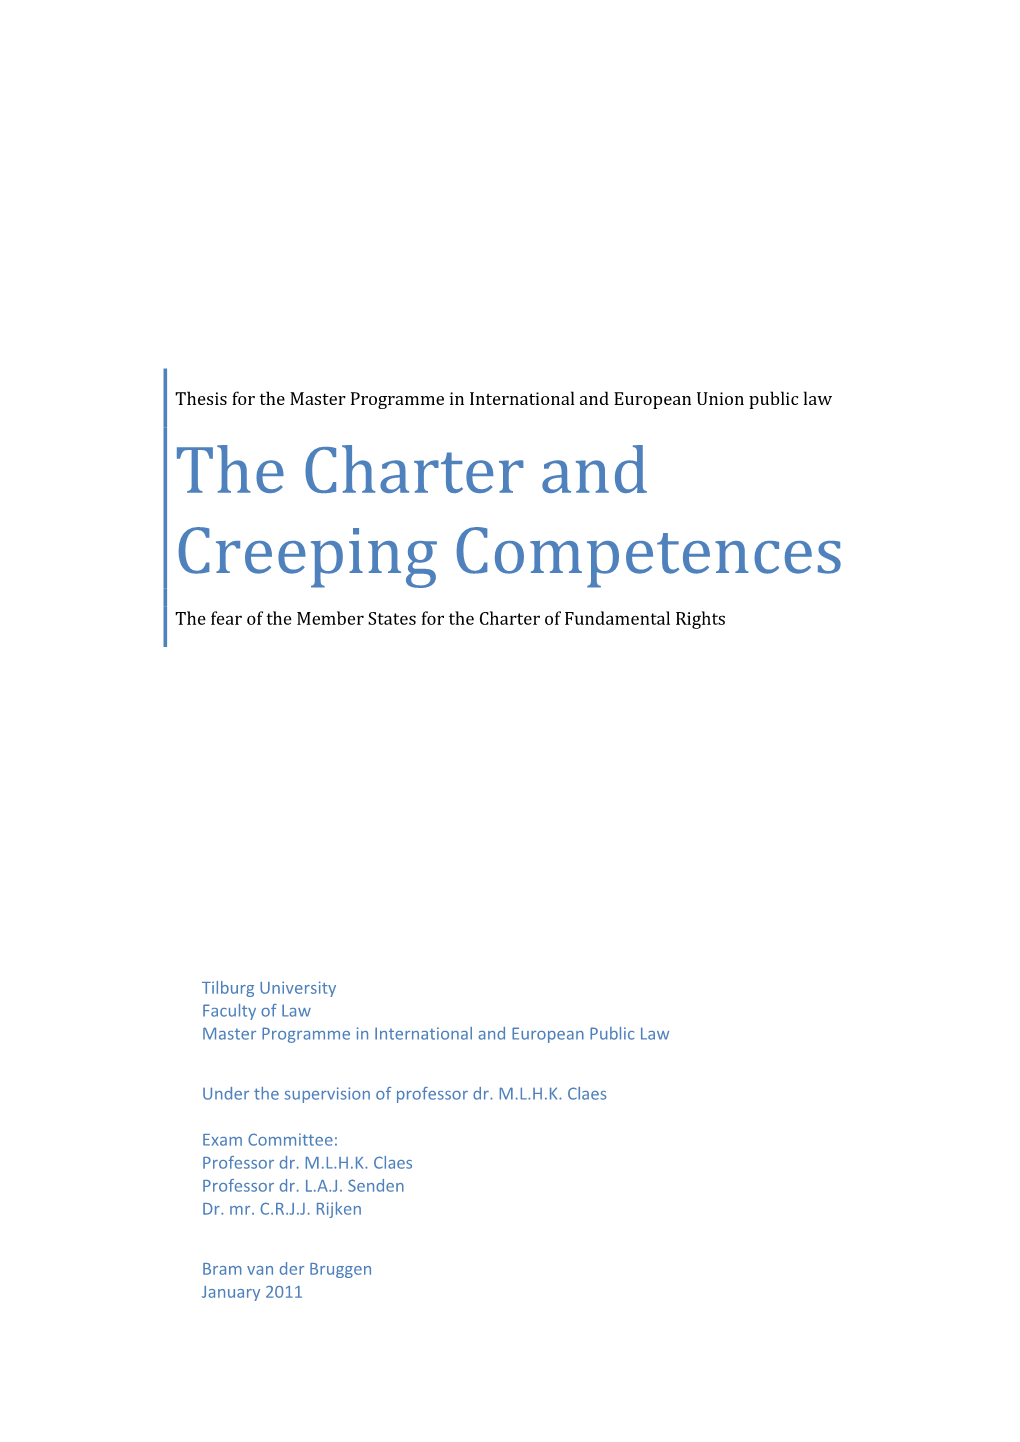 The Charter and Creeping Competences